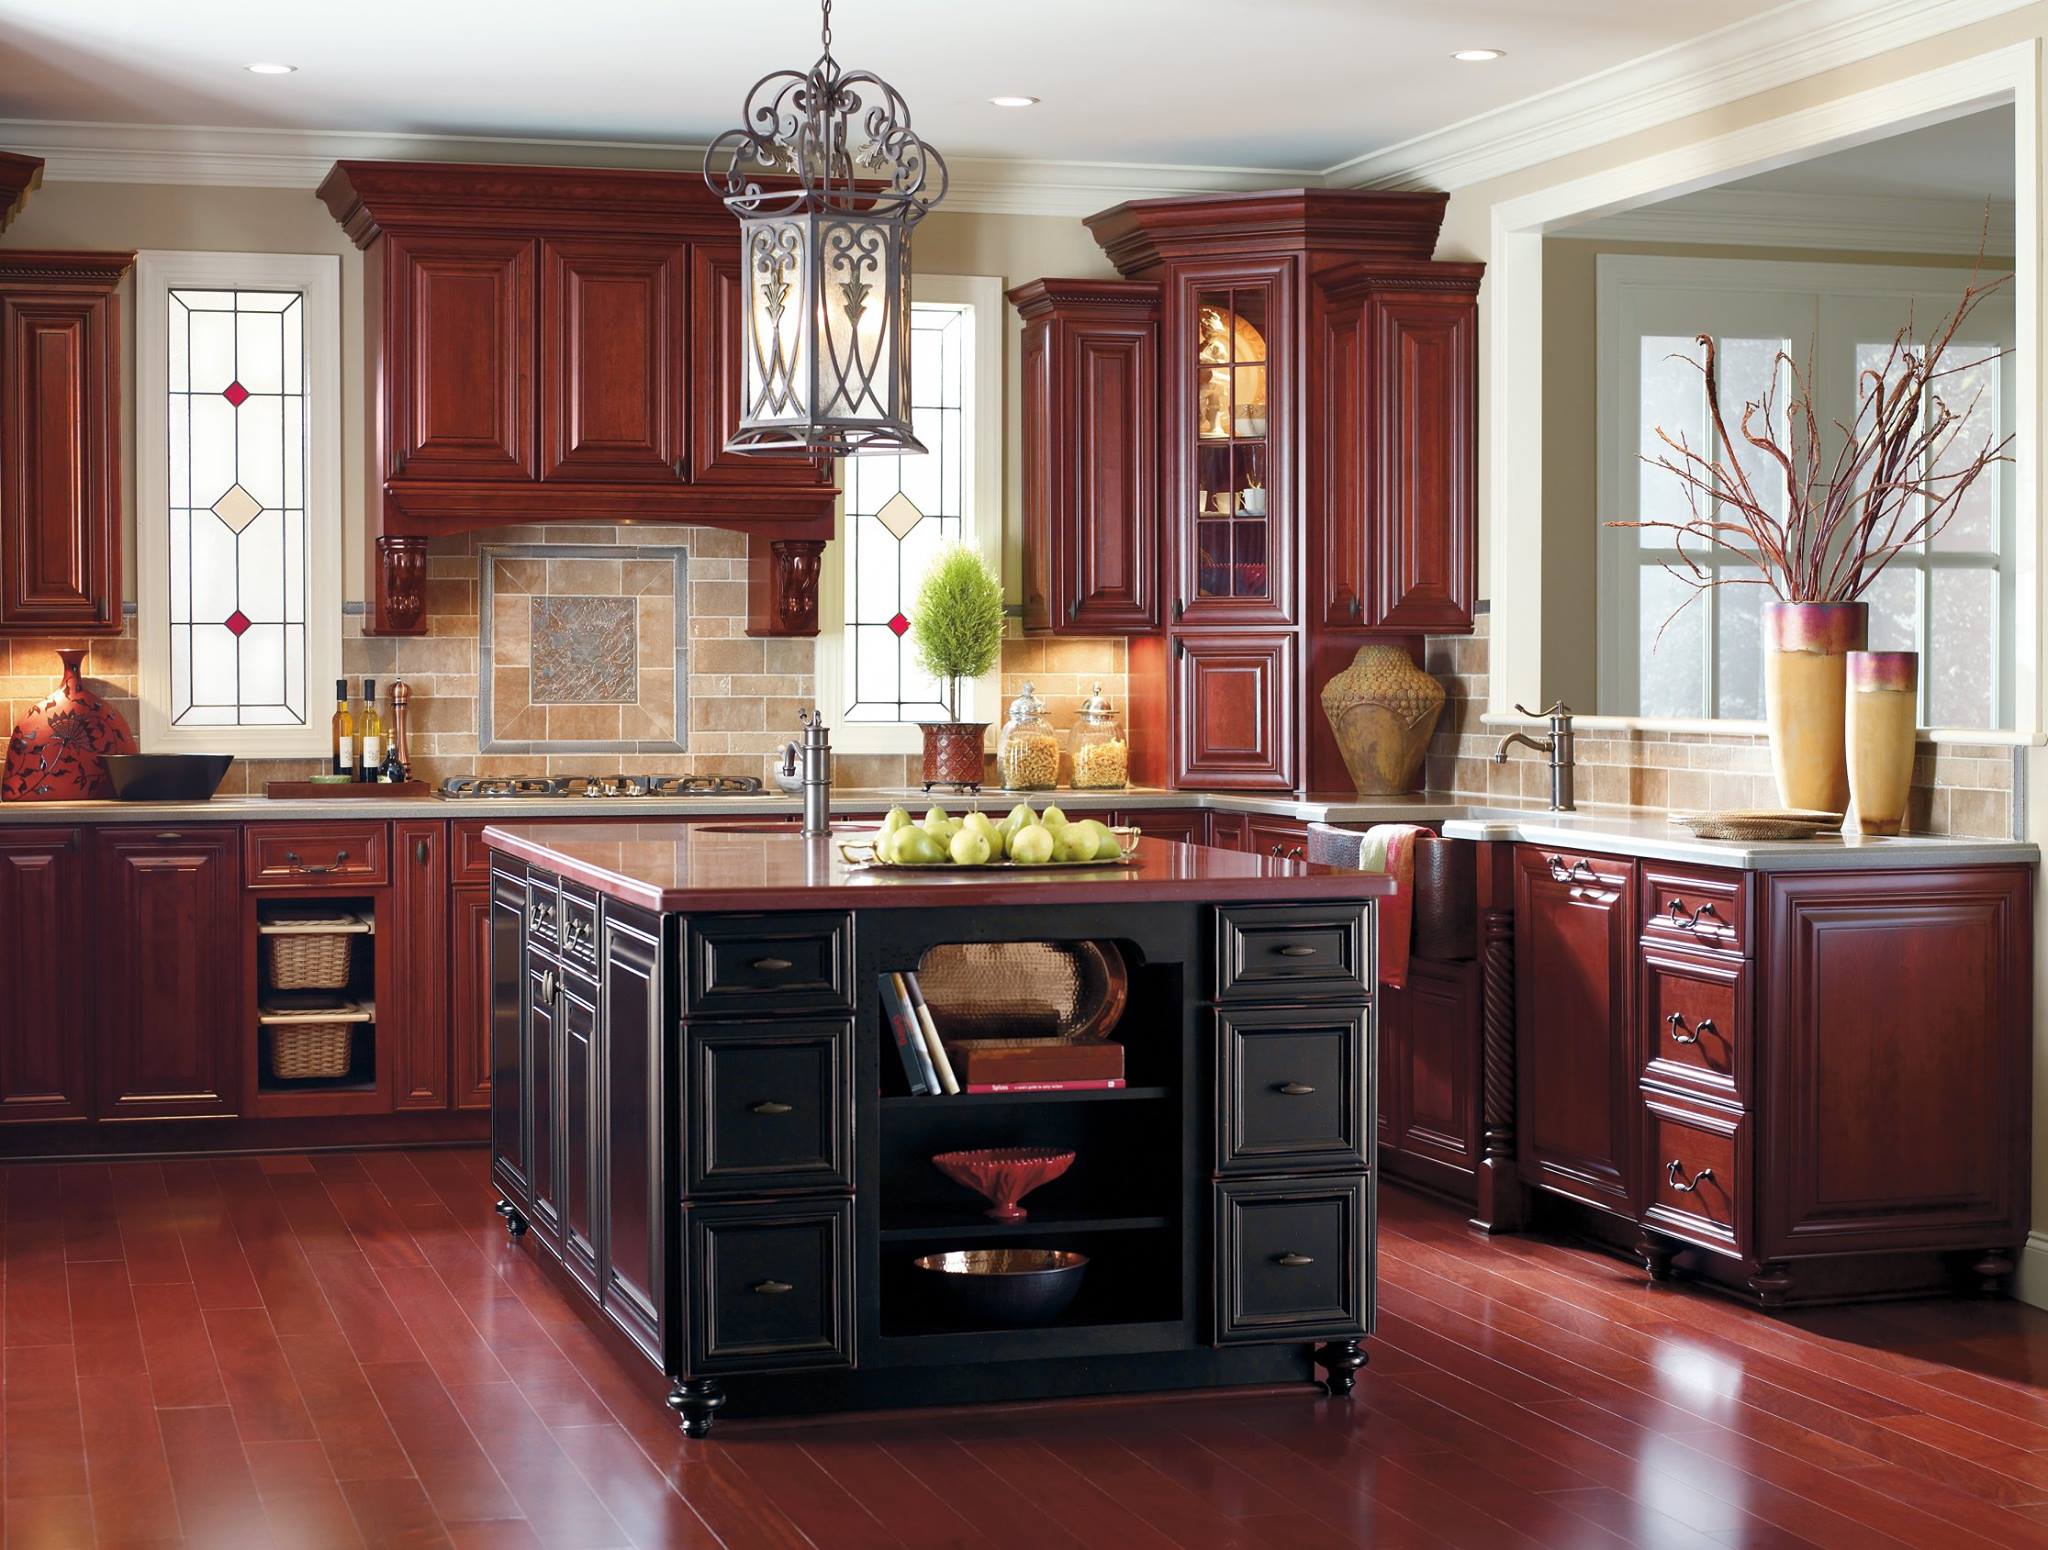 You are currently viewing Staggered Cabinets w/ Crown Molding